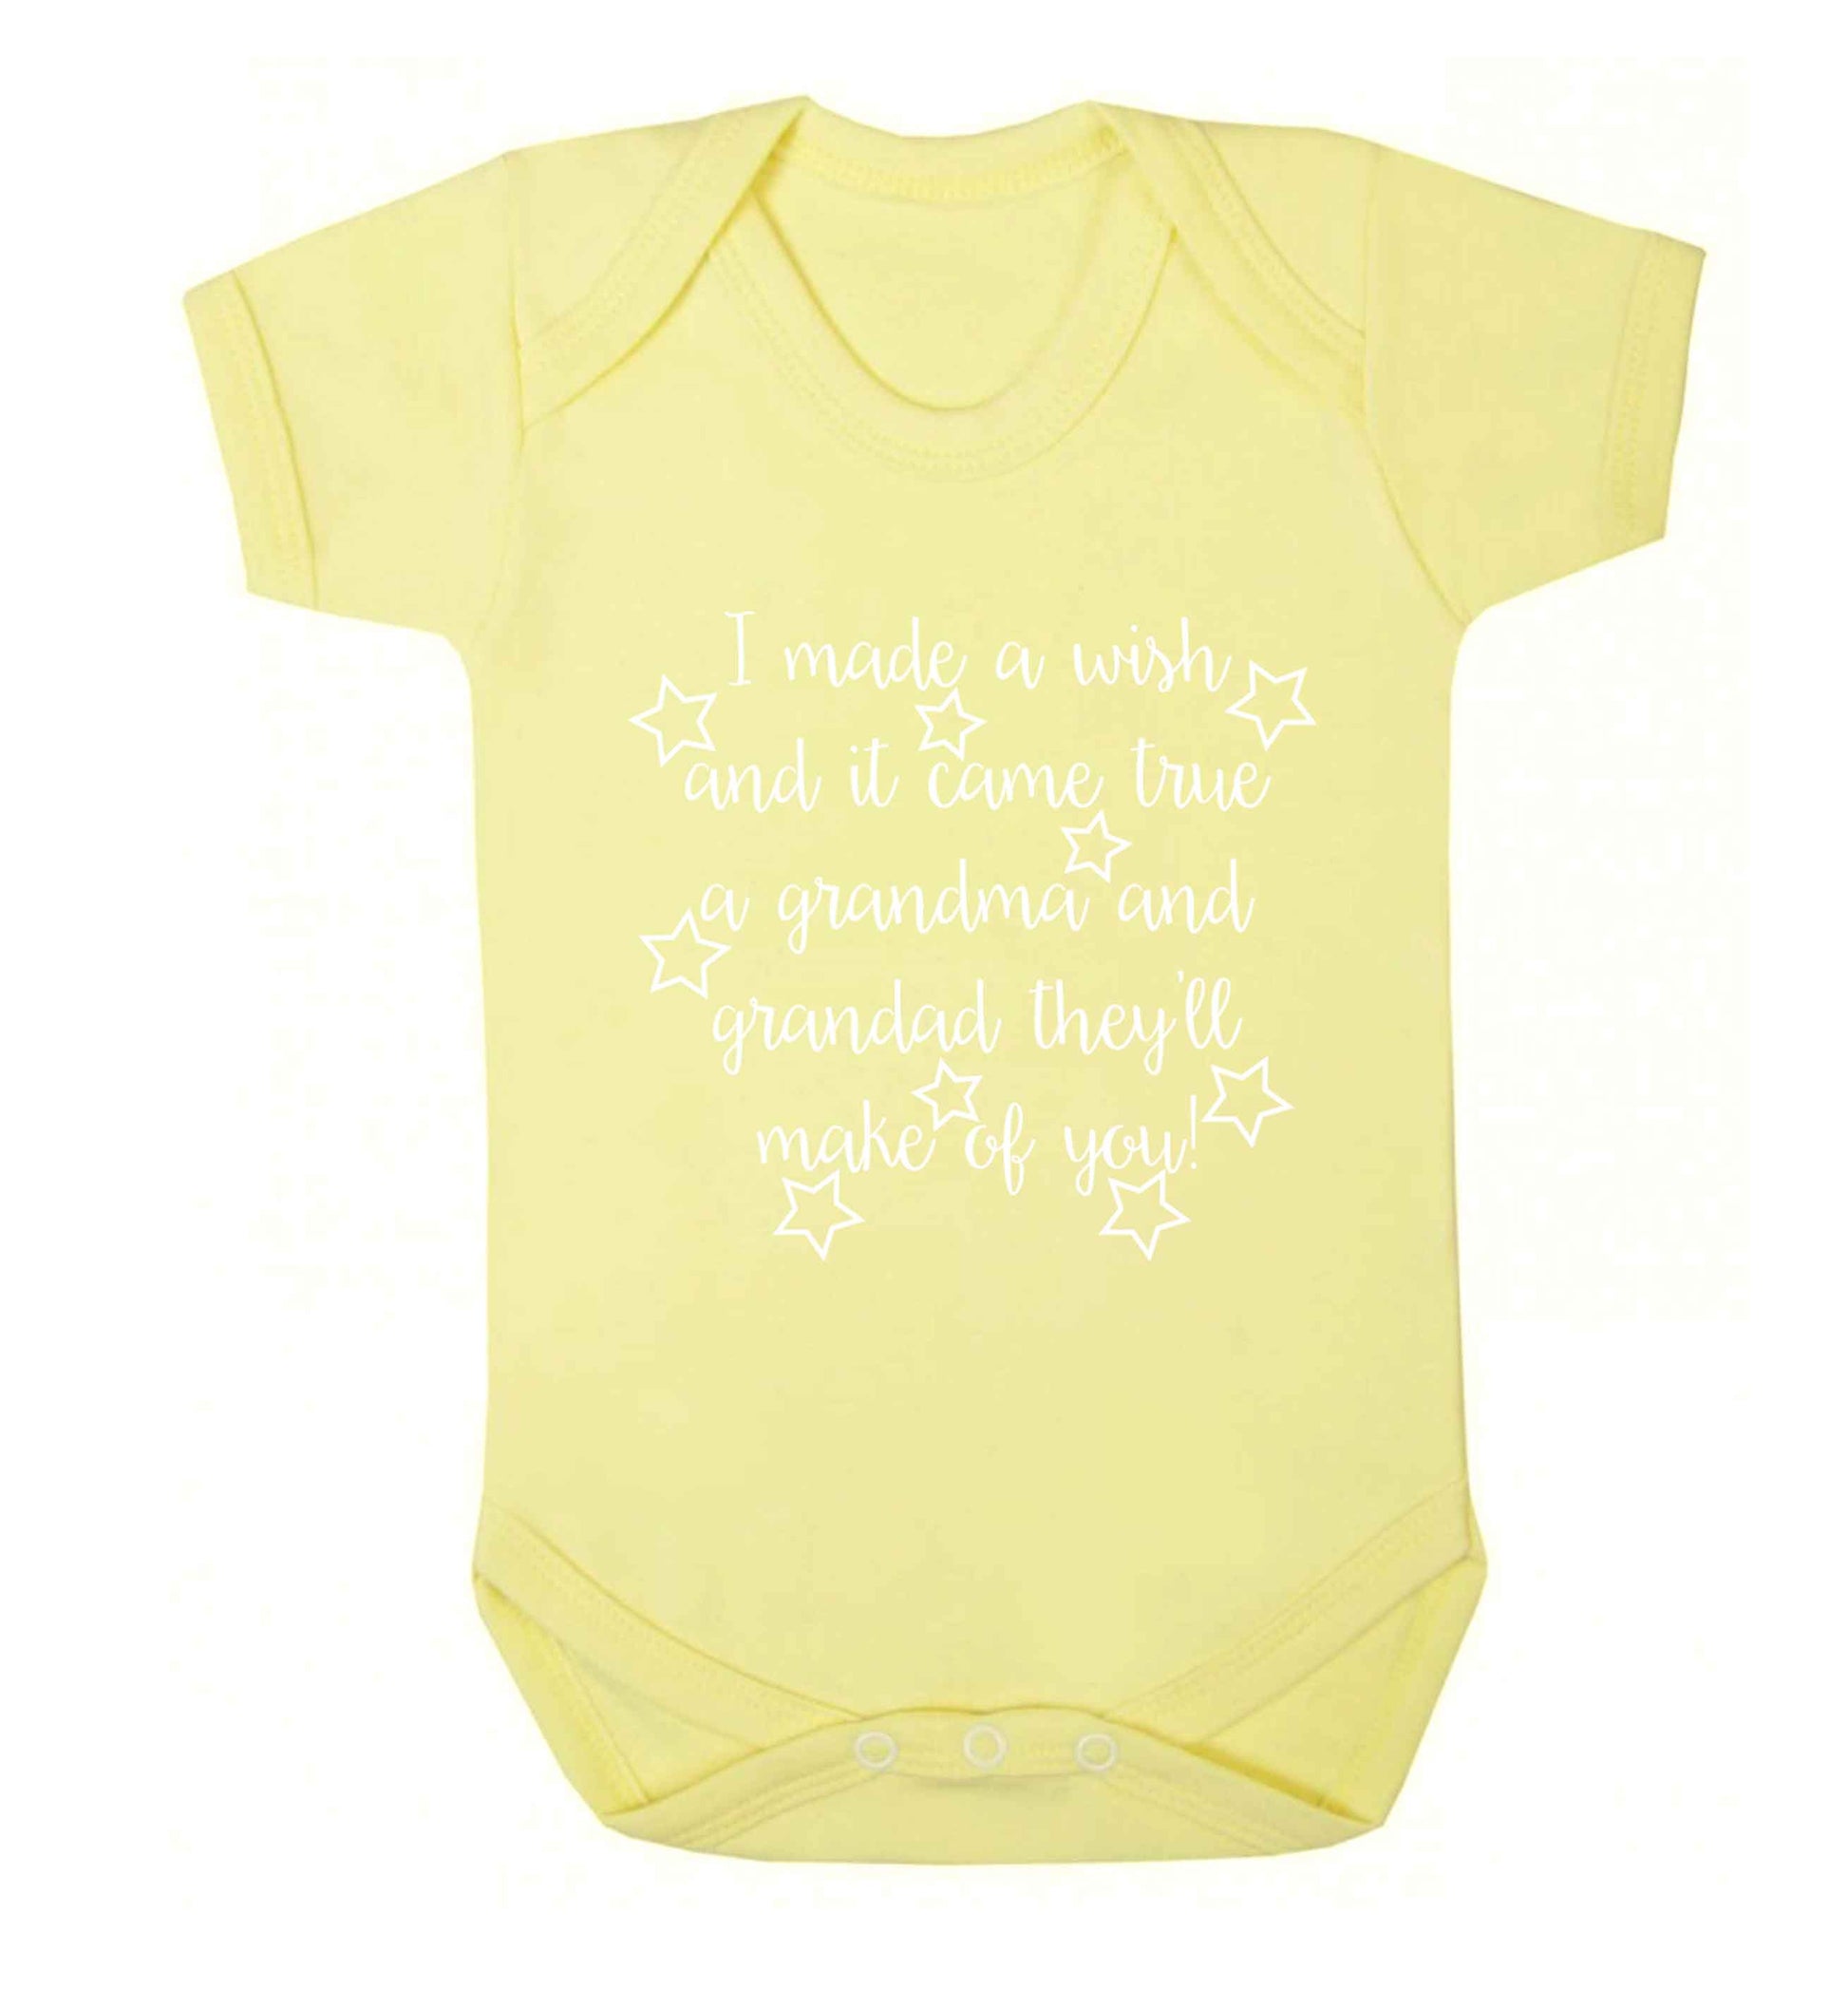 I made a wish and it came true a grandma and grandad they'll make of you! Baby Vest pale yellow 18-24 months